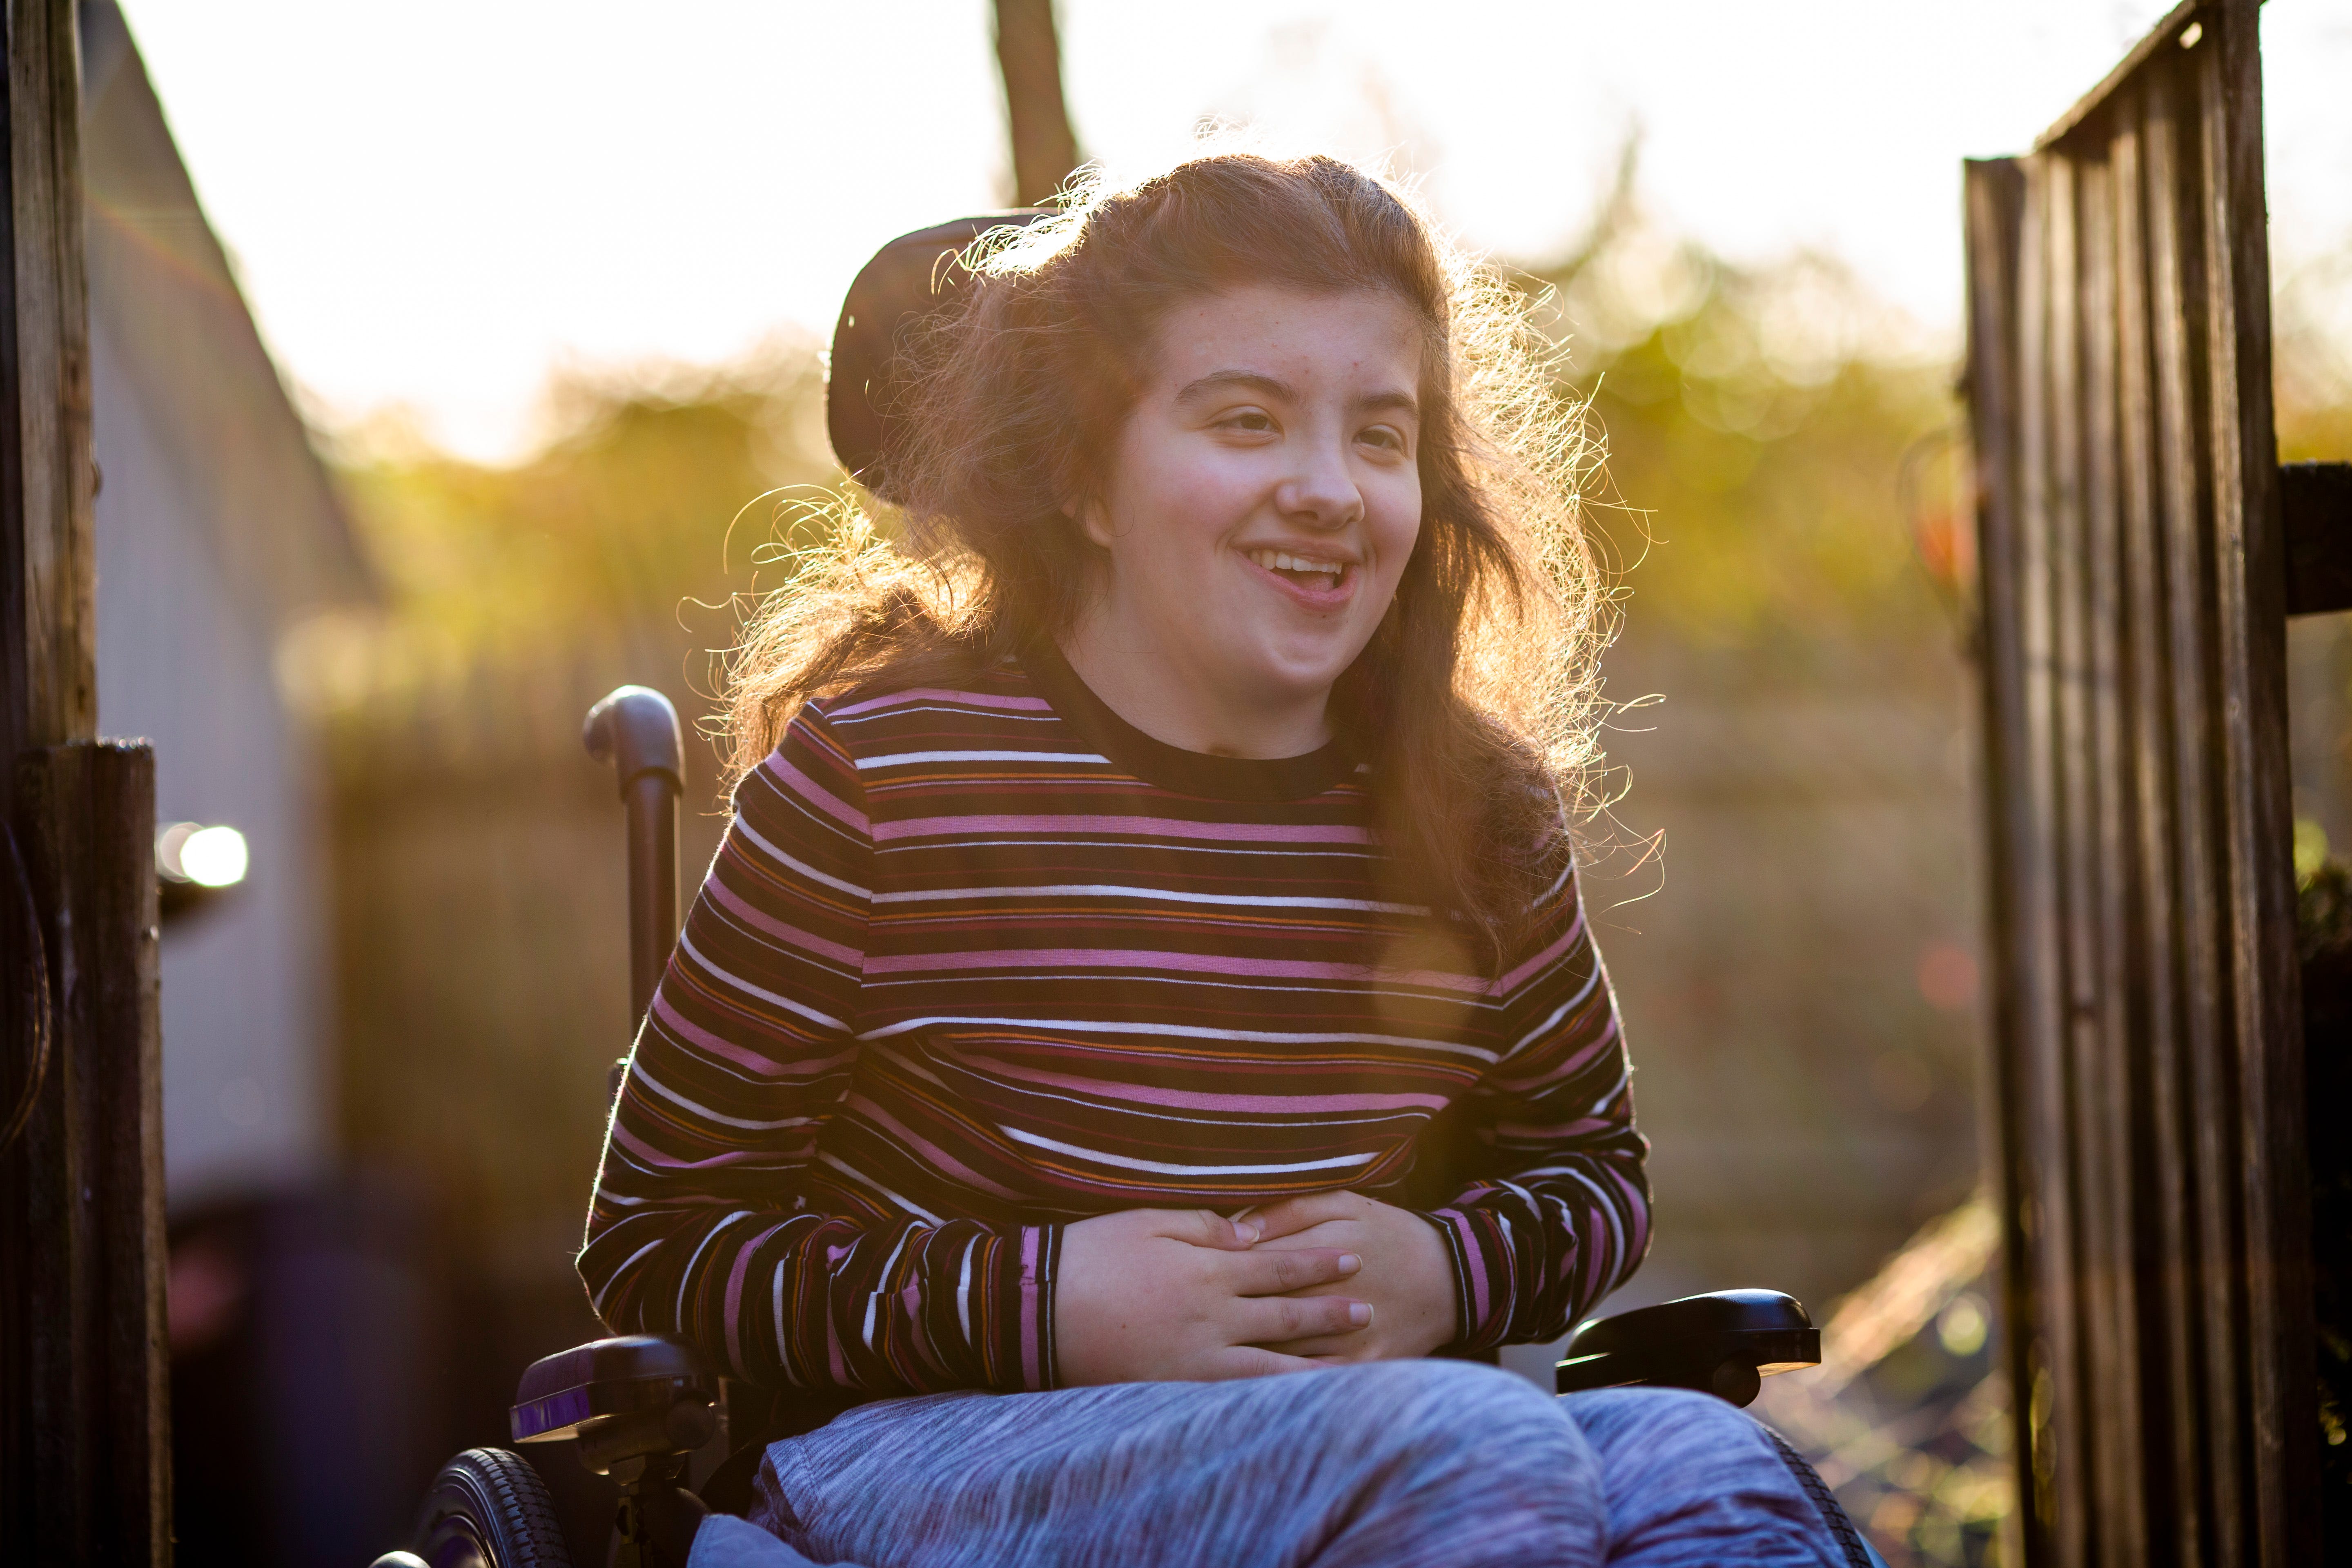 Sylvie Wallis, 16, was born with a genetic mutation that left her with developmental disabilities. It took more than a decade to correctly identify the genetic cause.